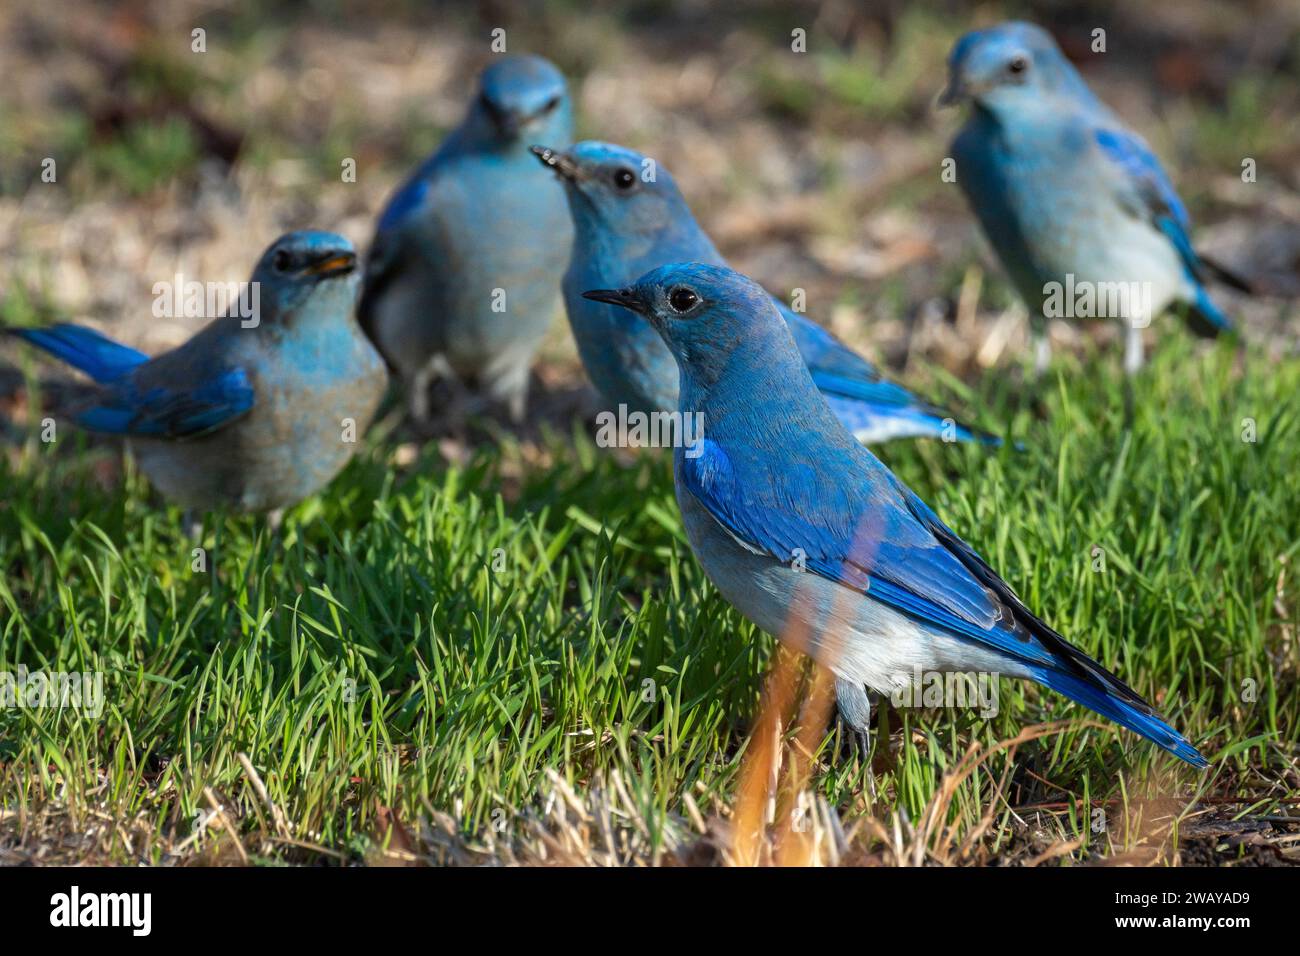 A small flock of male mountain bluebirds (Sialia currucoides) gather on the grass. Stock Photo